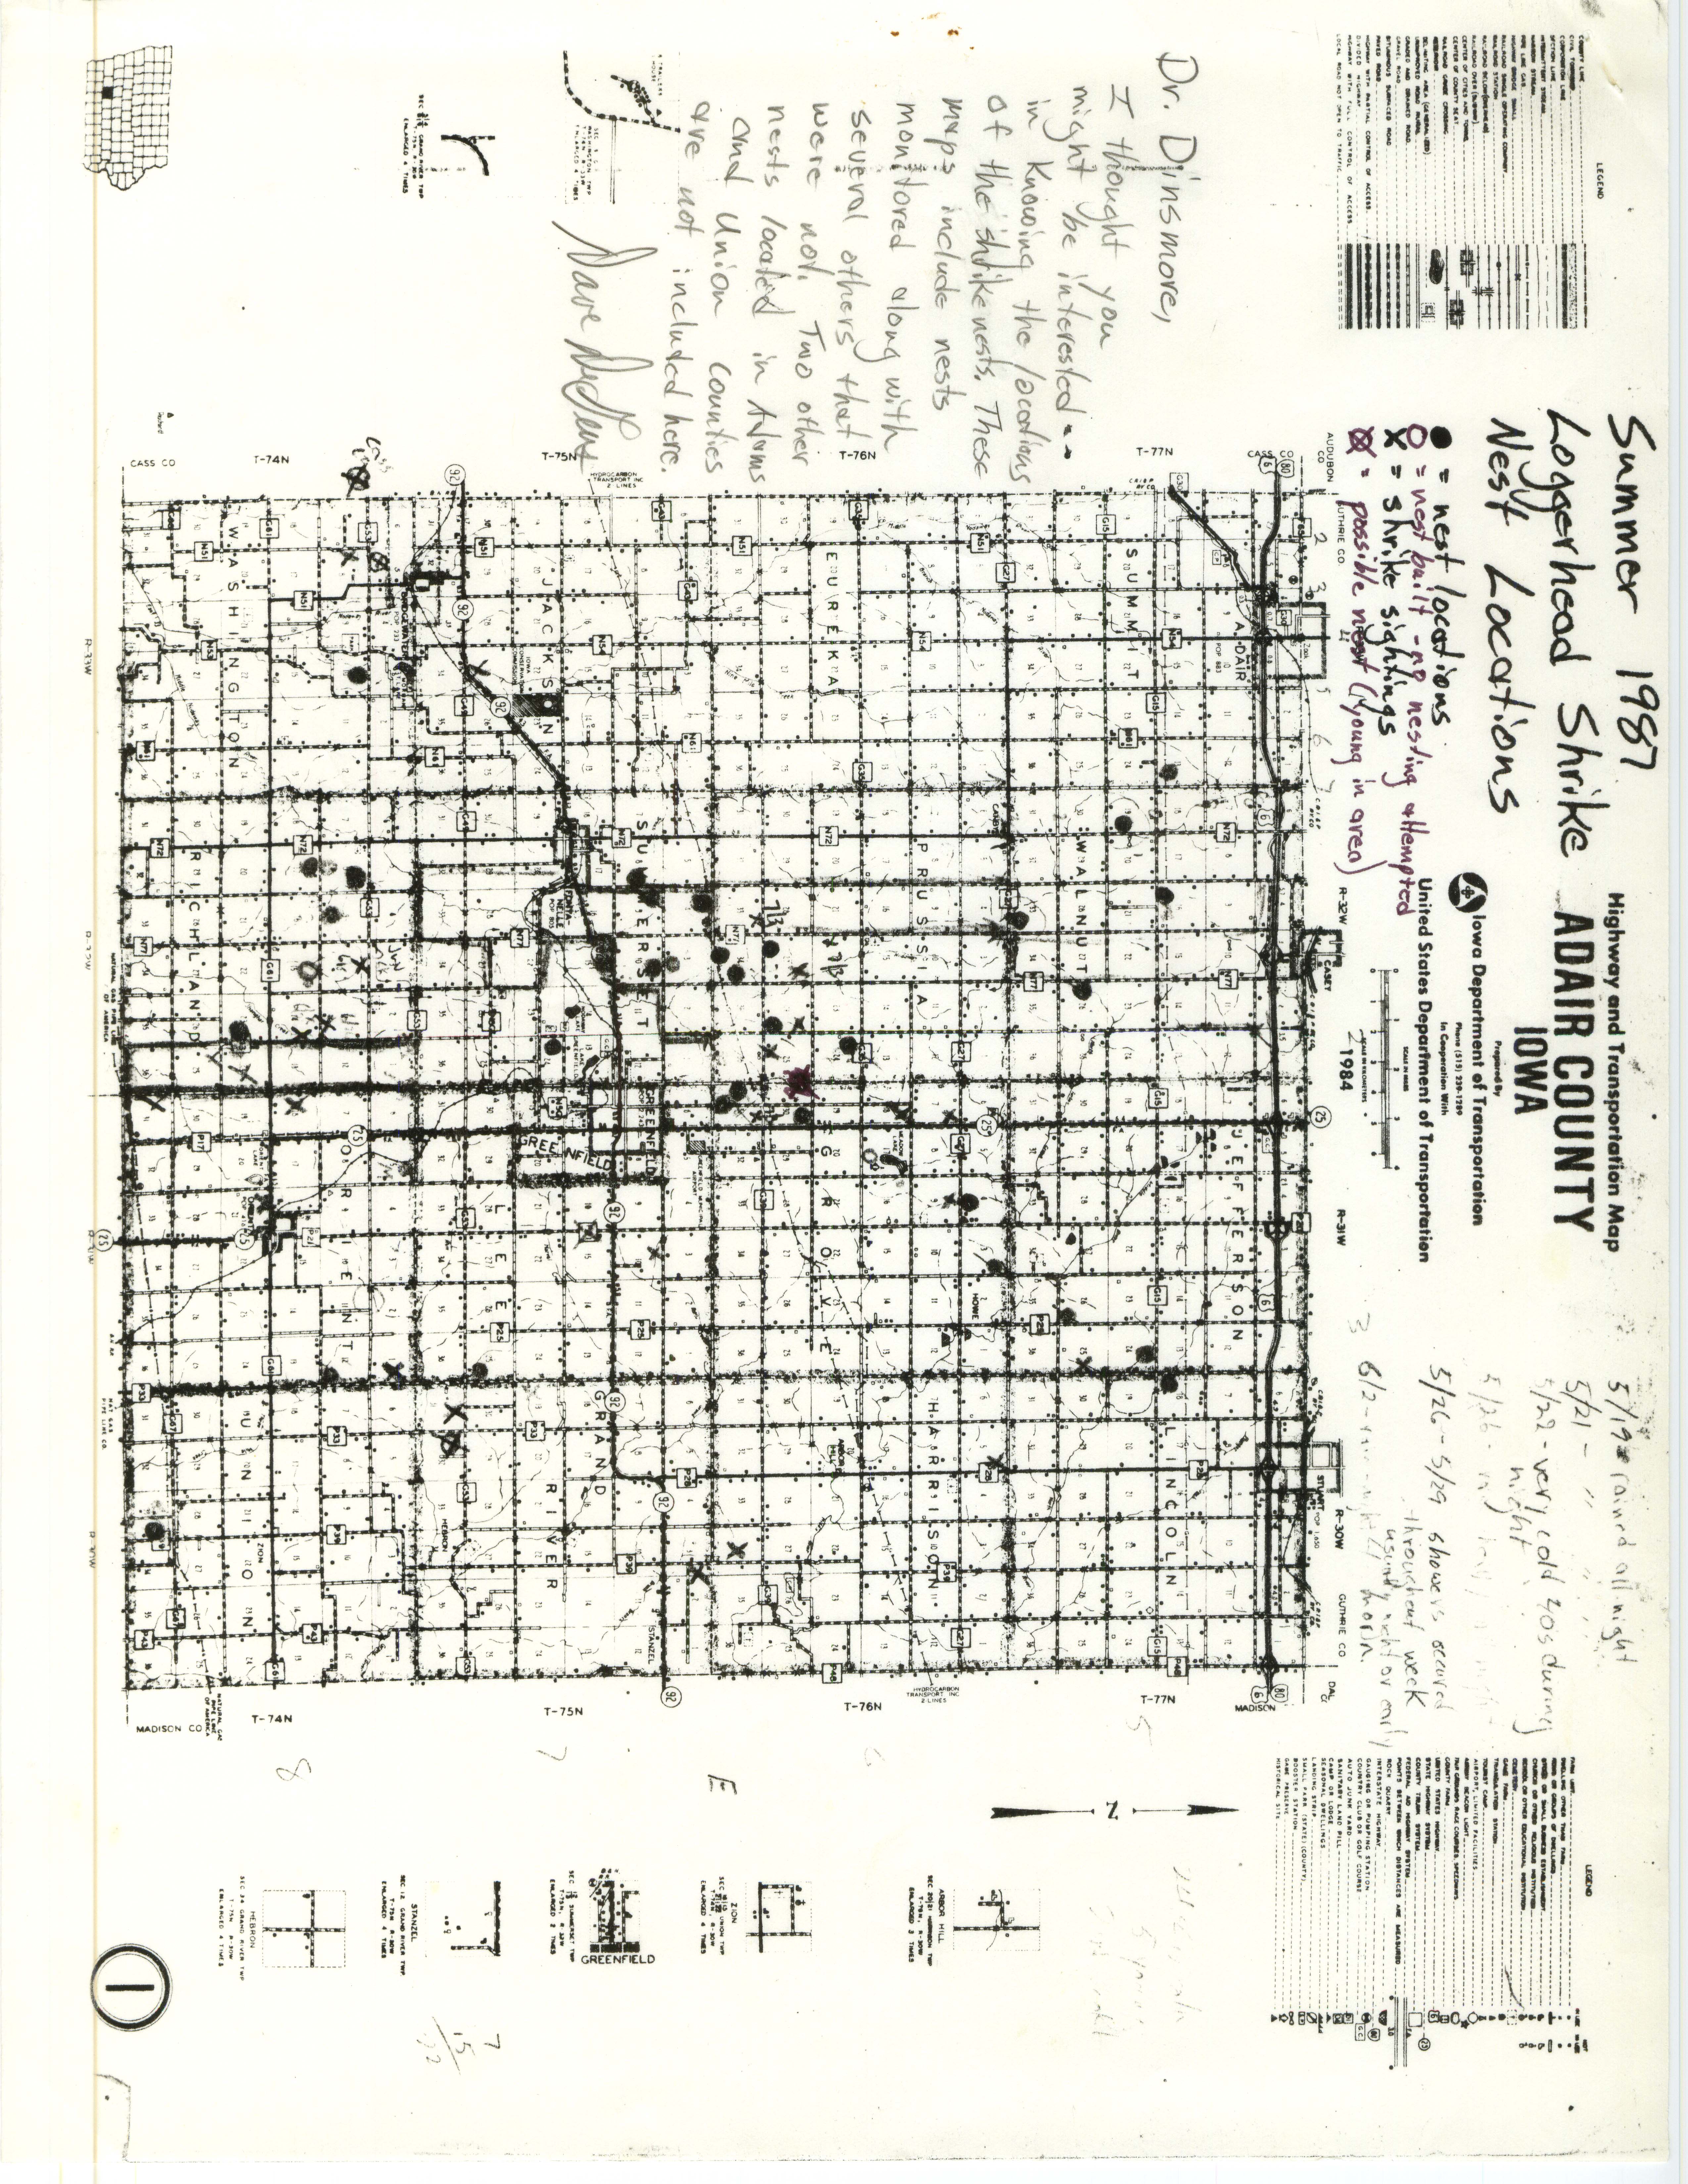 Maps of Adair County and Ringgold County with Loggerhead Shrike nest locations observed by David DeGeus, summer 1987